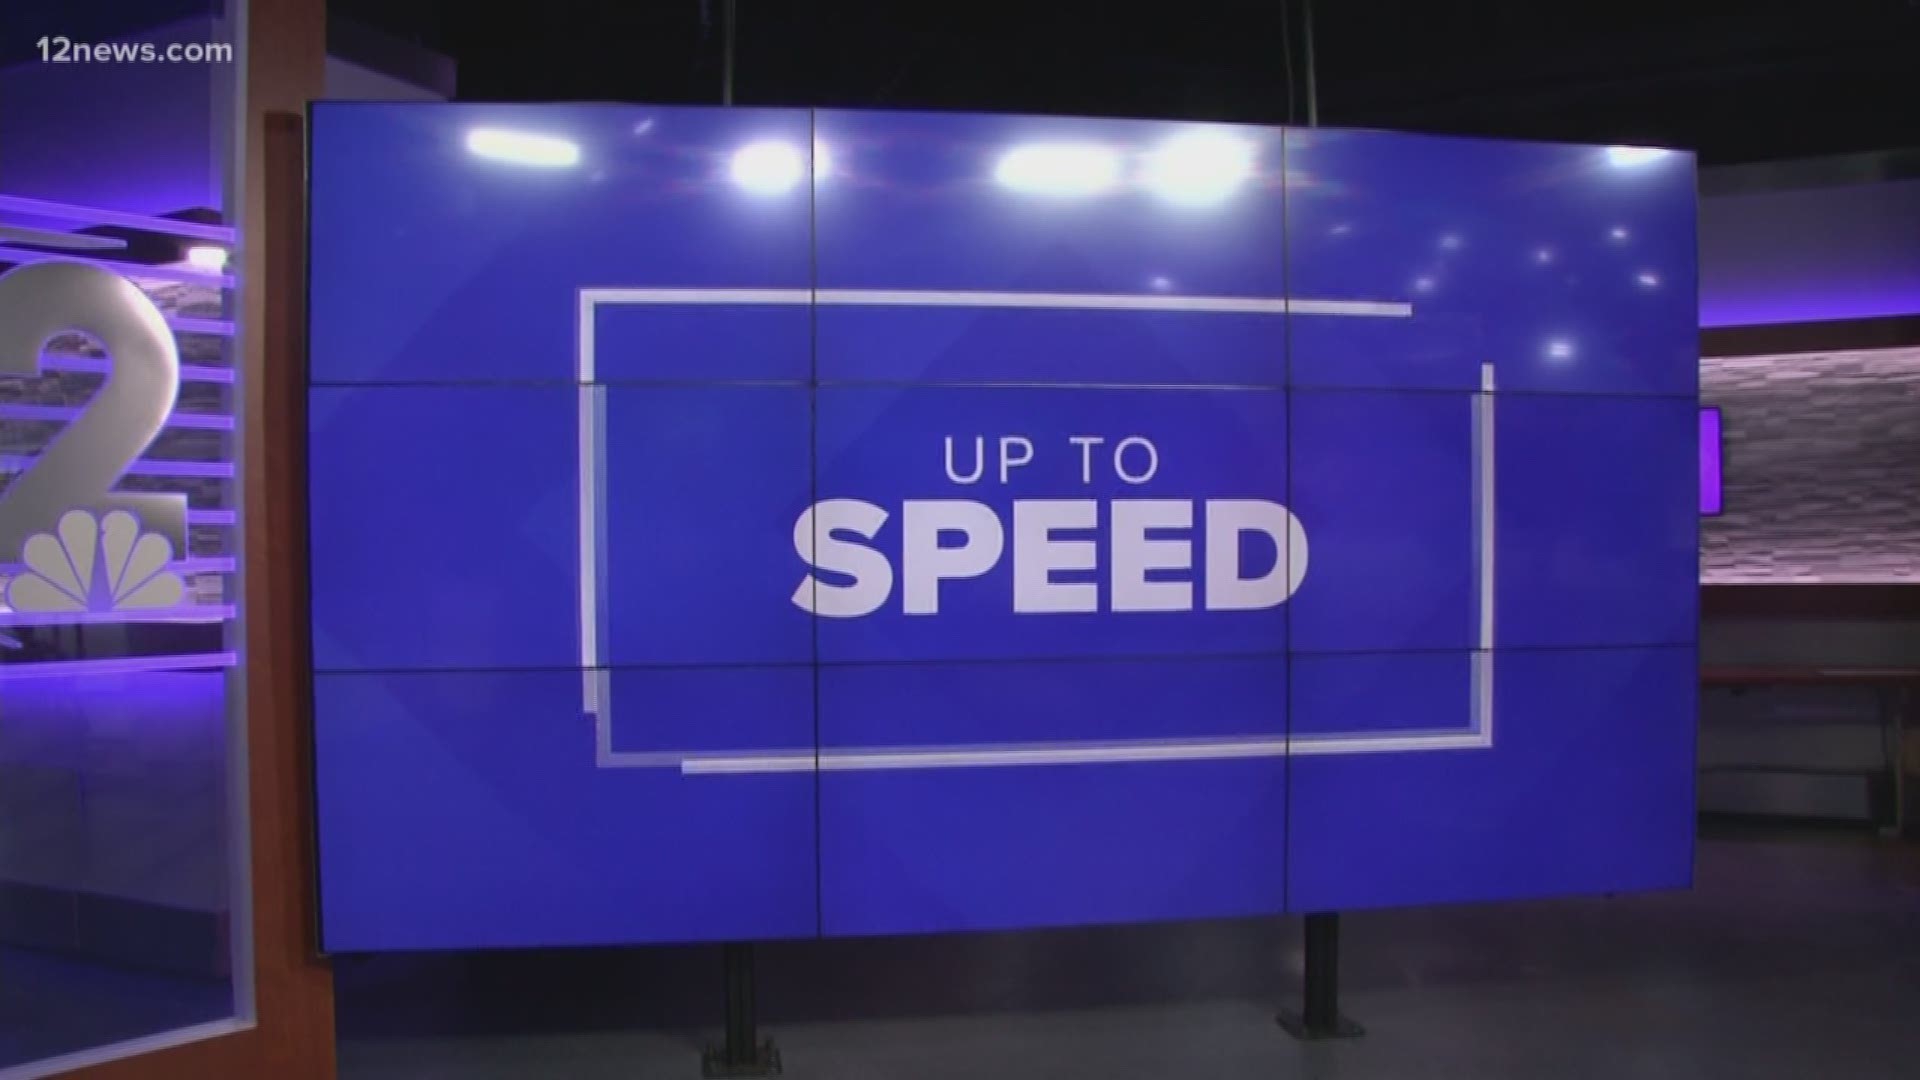 We get you "Up to Speed" on the latest news happening around the Valley and across the nation on Tuesday afternoon.